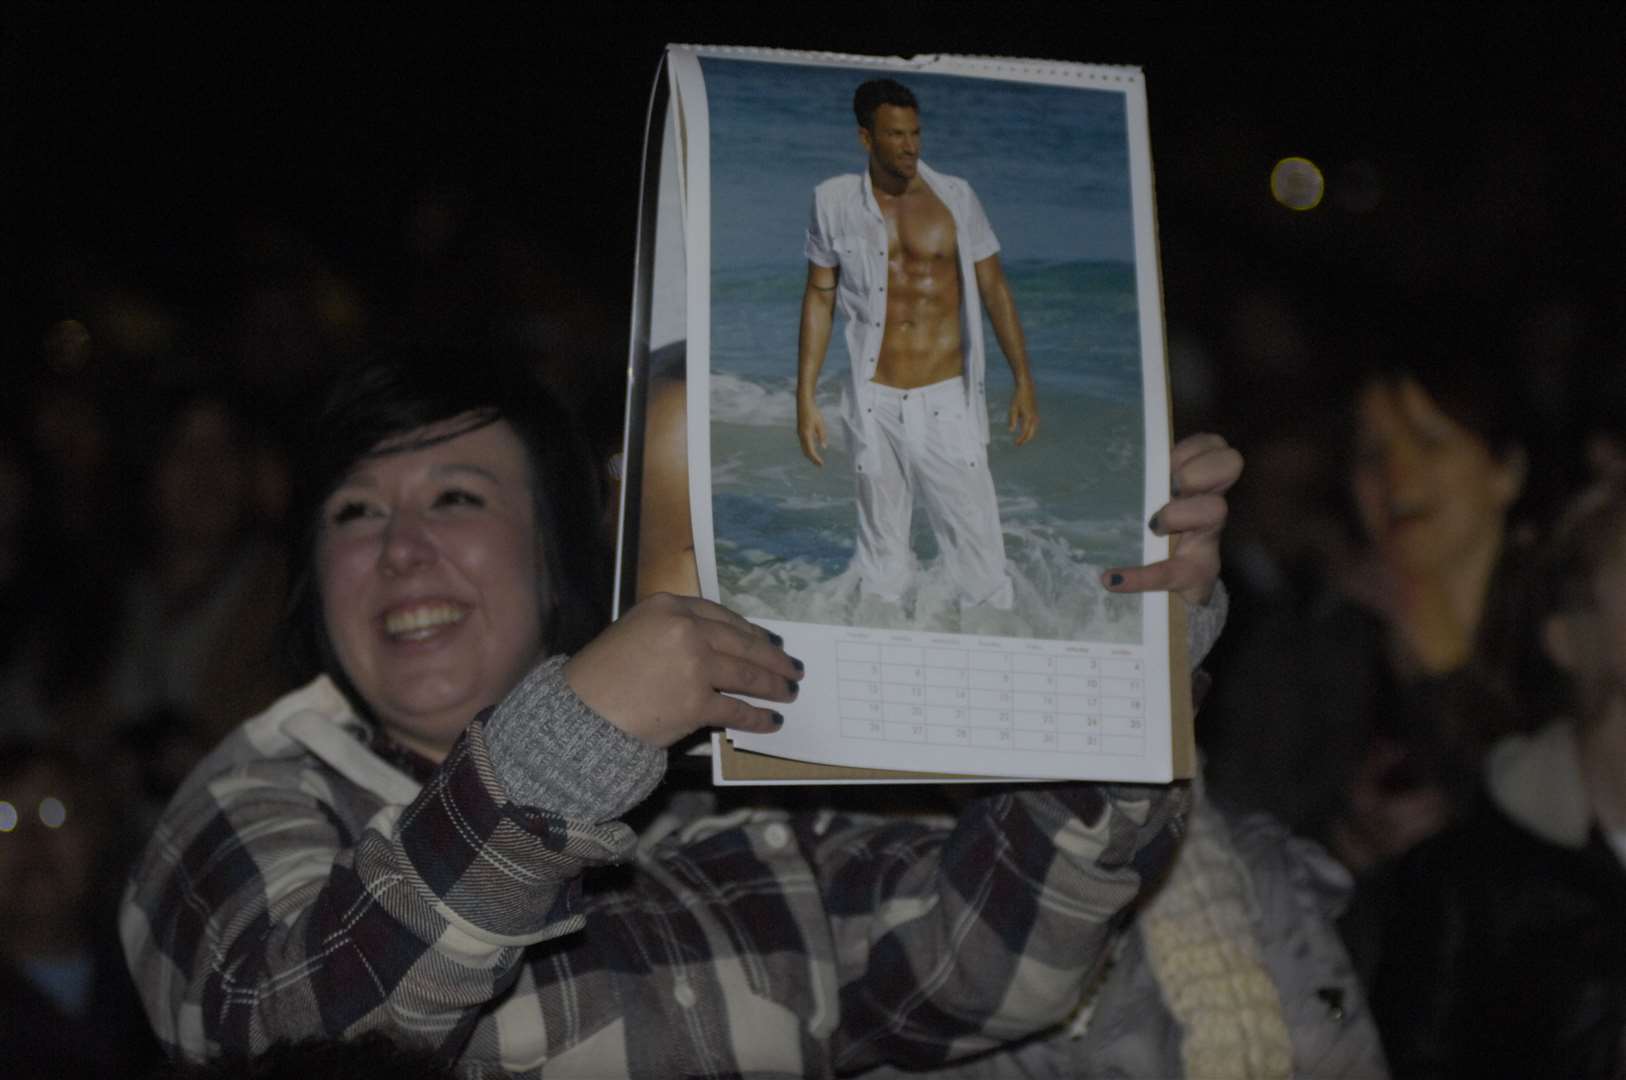 Fans were excited to see Peter Andre at the site in 2011